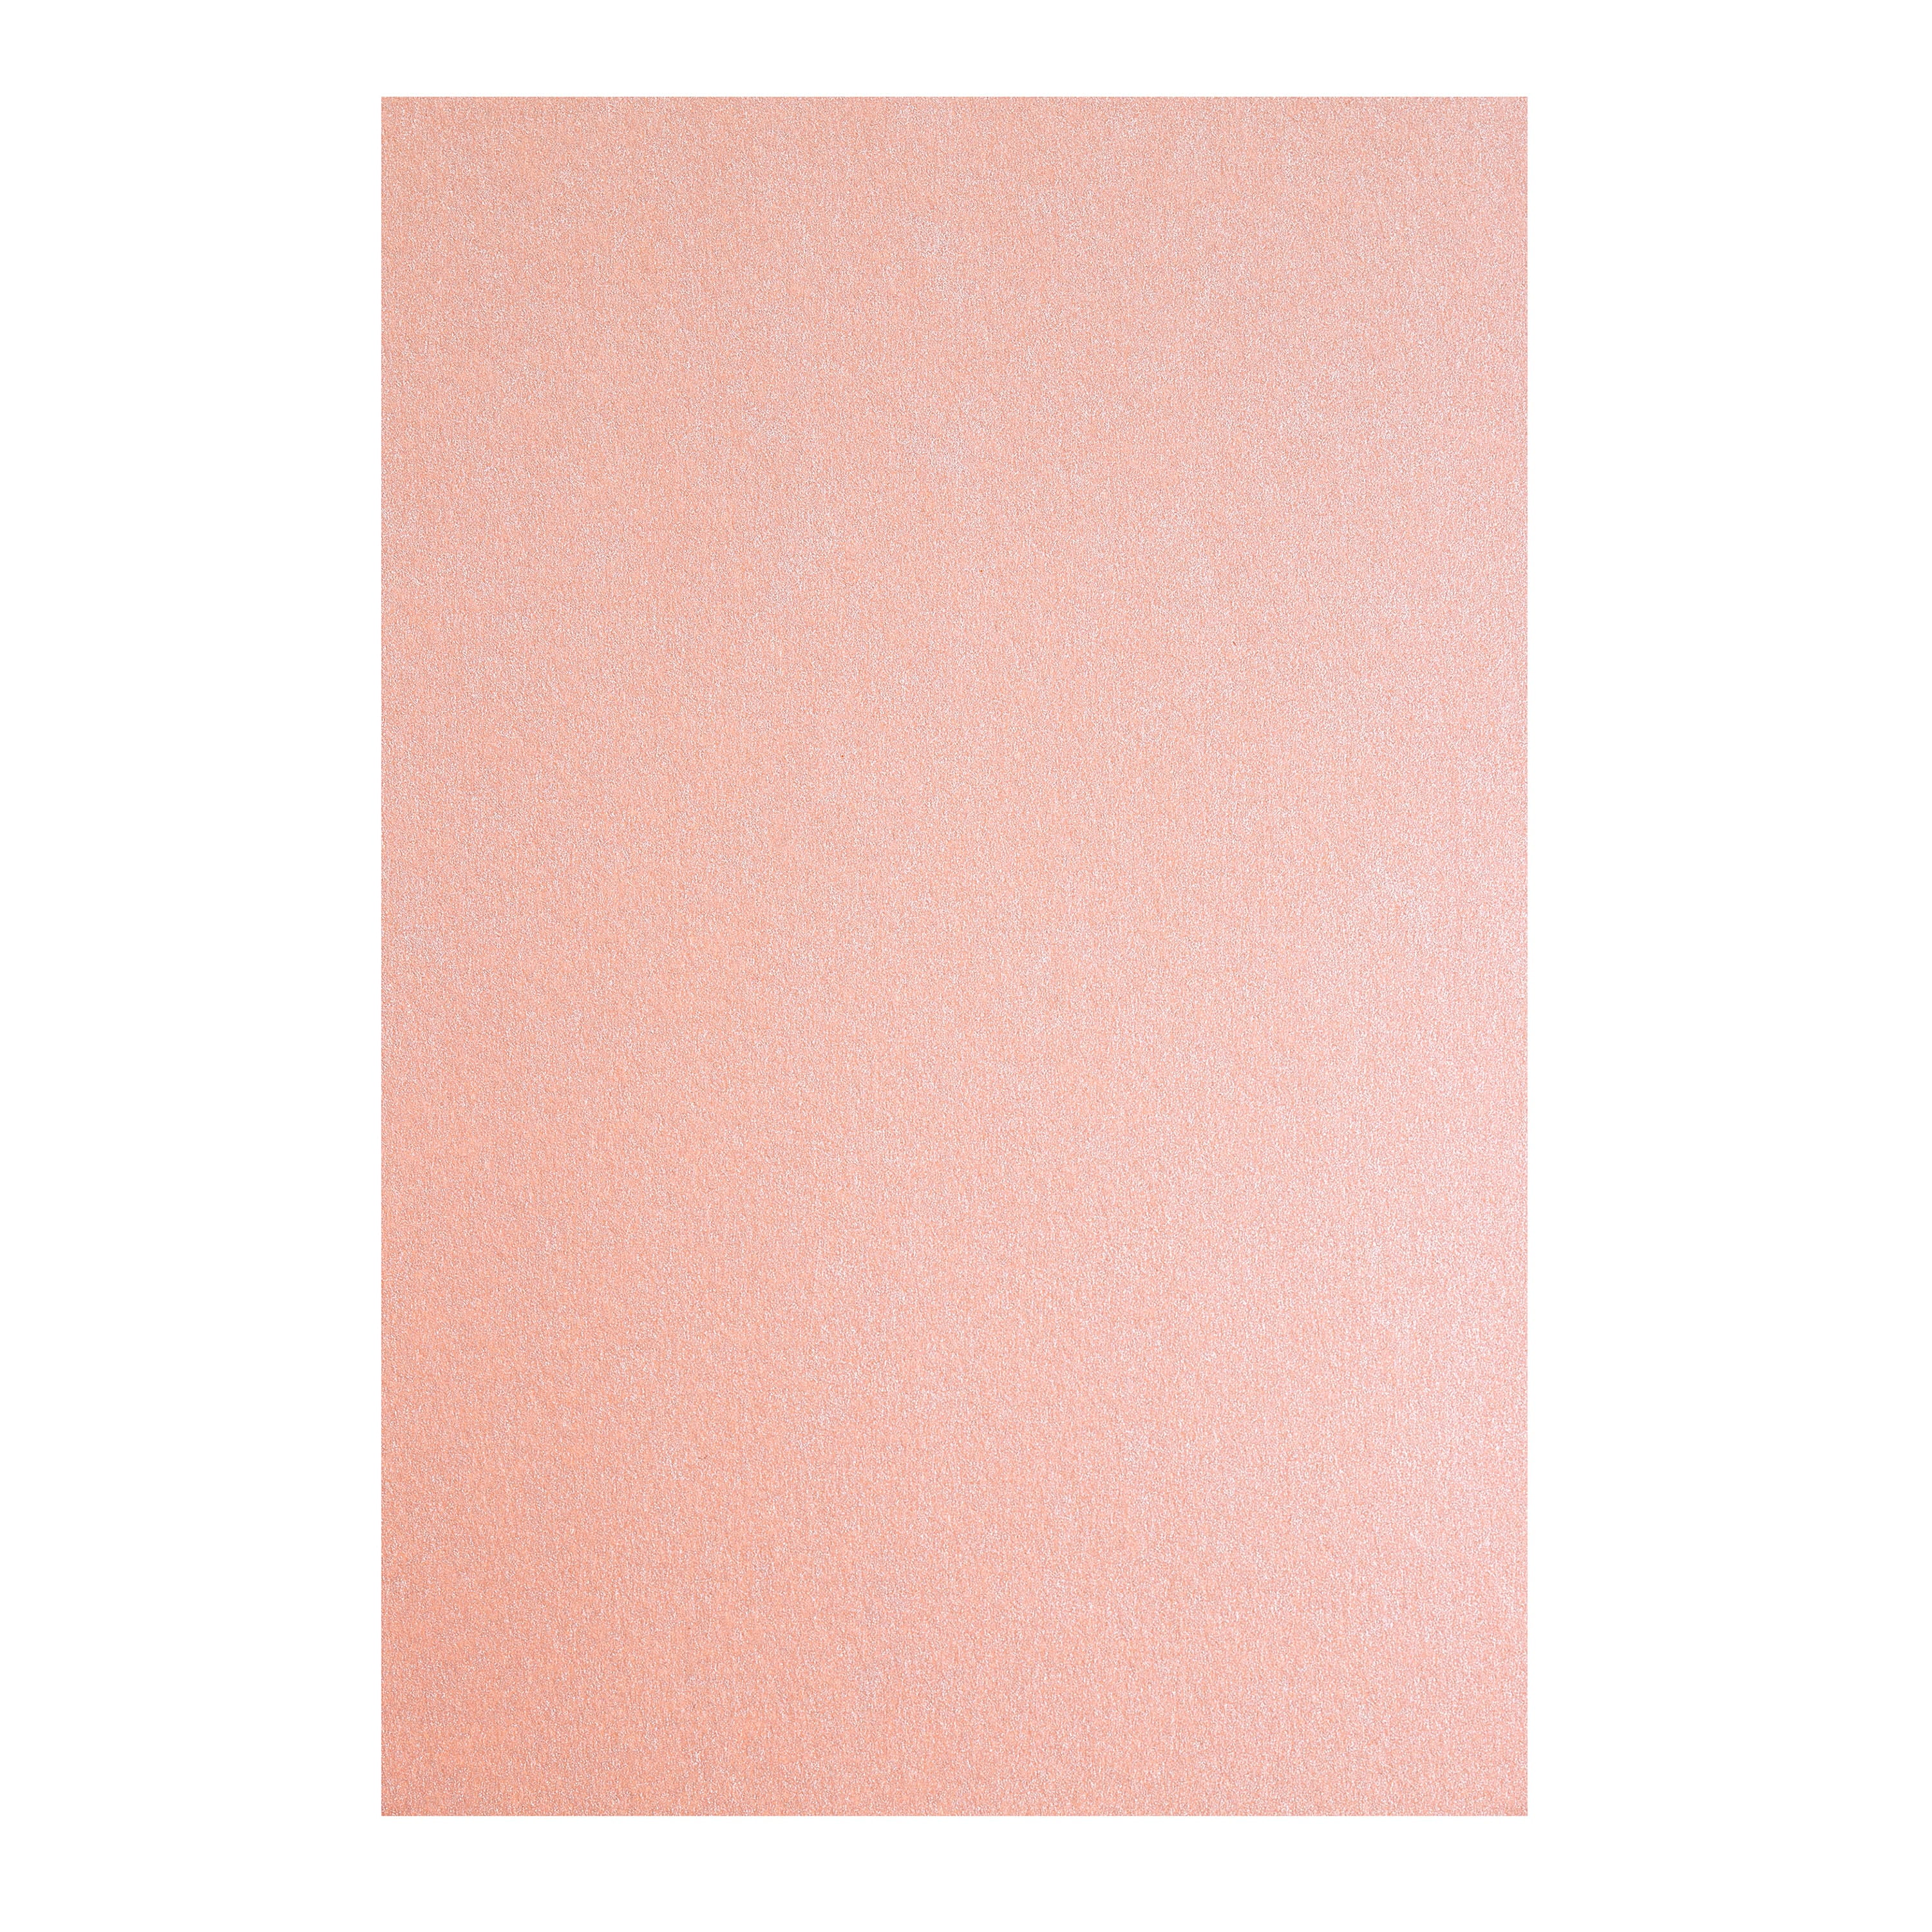 Rose Gold Shimmer 8.5 x 11 Cardstock Paper by Recollections 100 Sheets | Michaels